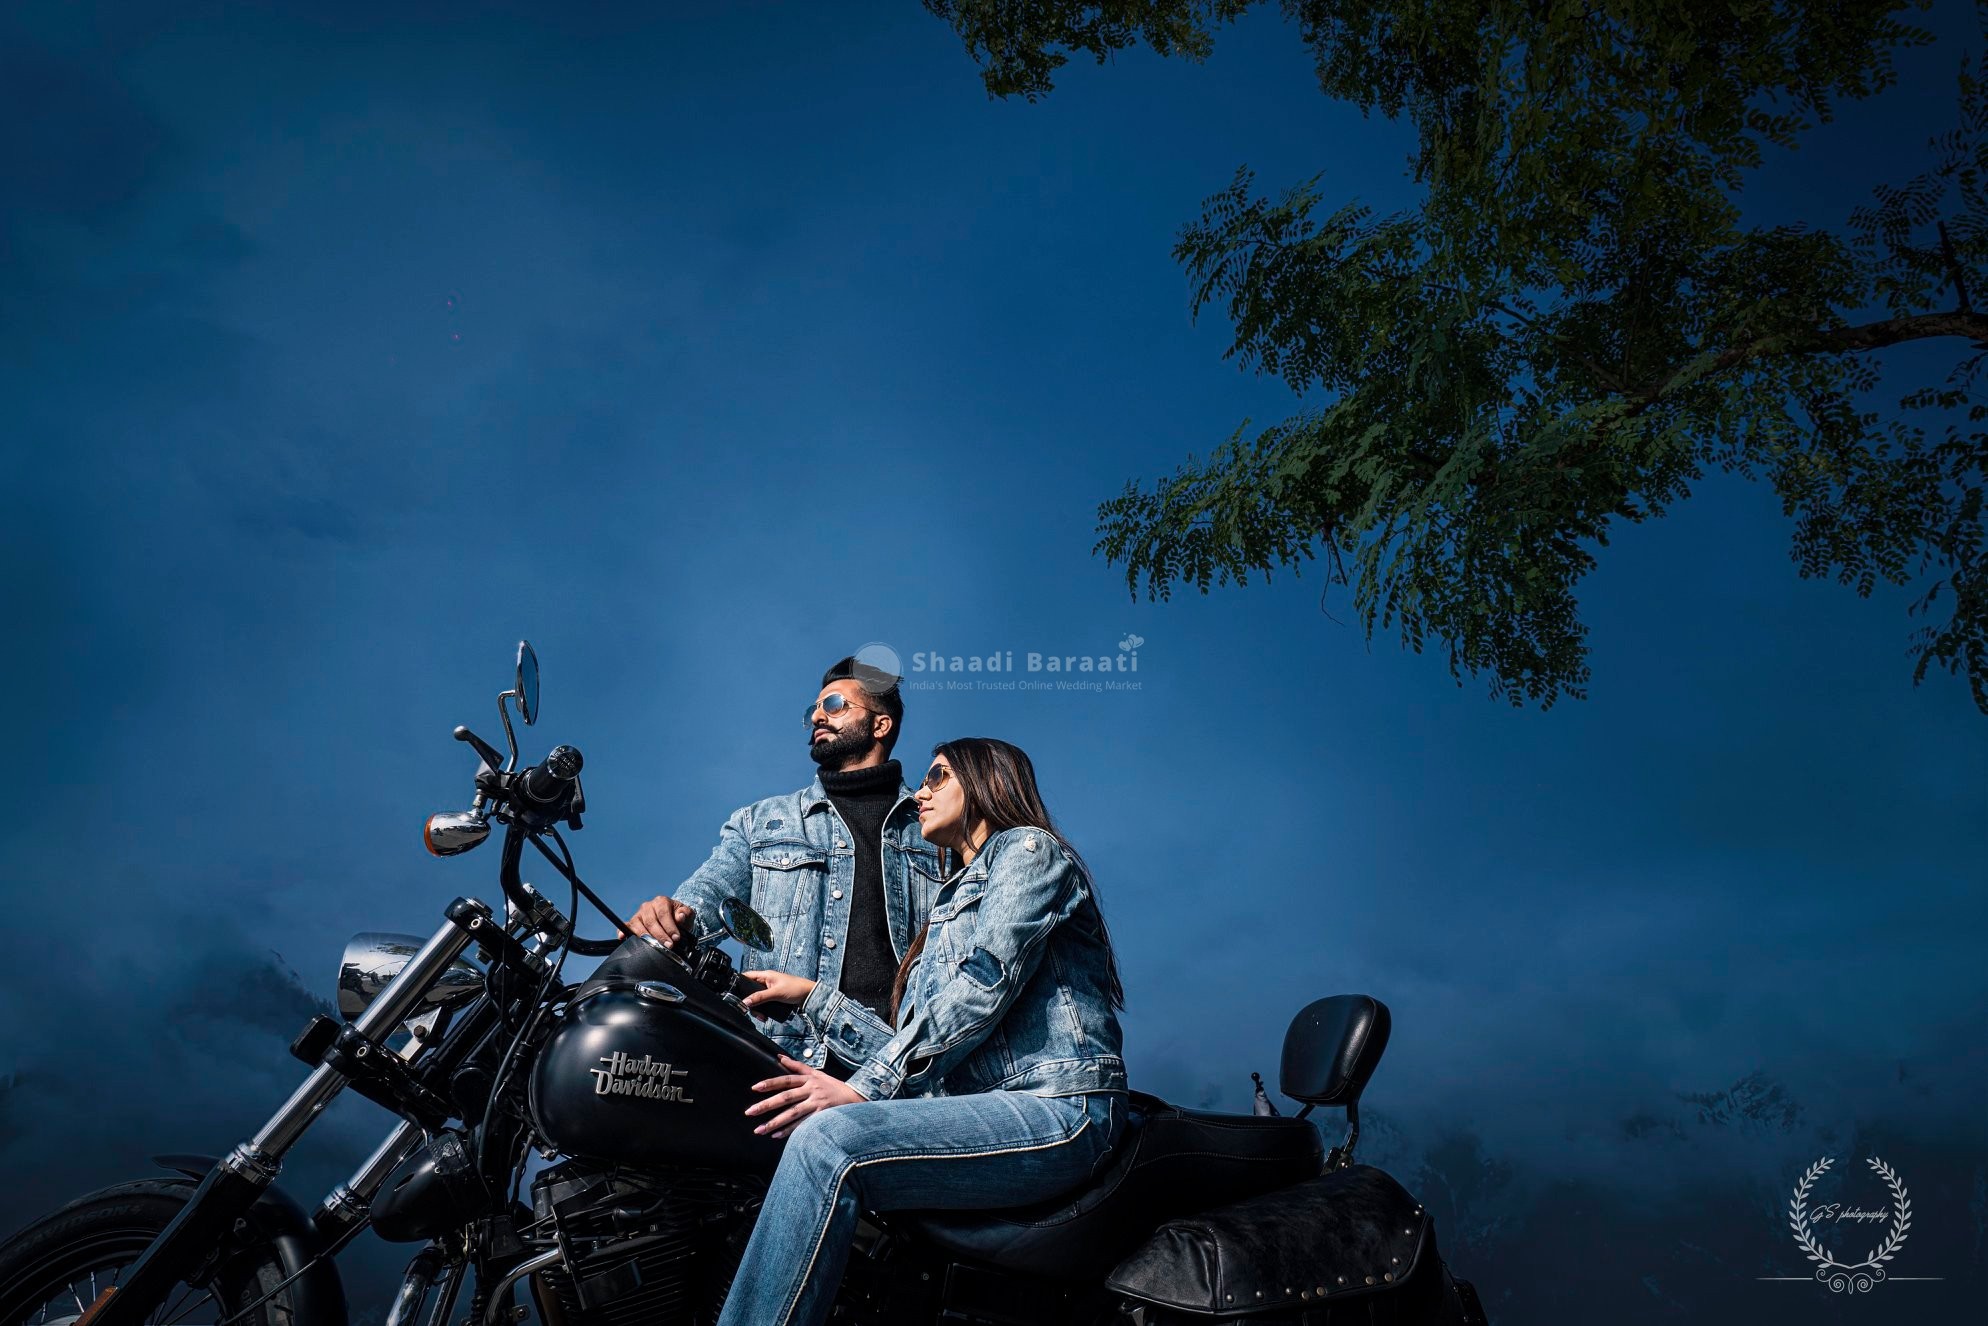 Motorcycle Couple - Couples Pictures on Motorcycle - Biker Couple | Motorcycle  couple pictures, Motorcycle couple photography, Motorcycle photo shoot